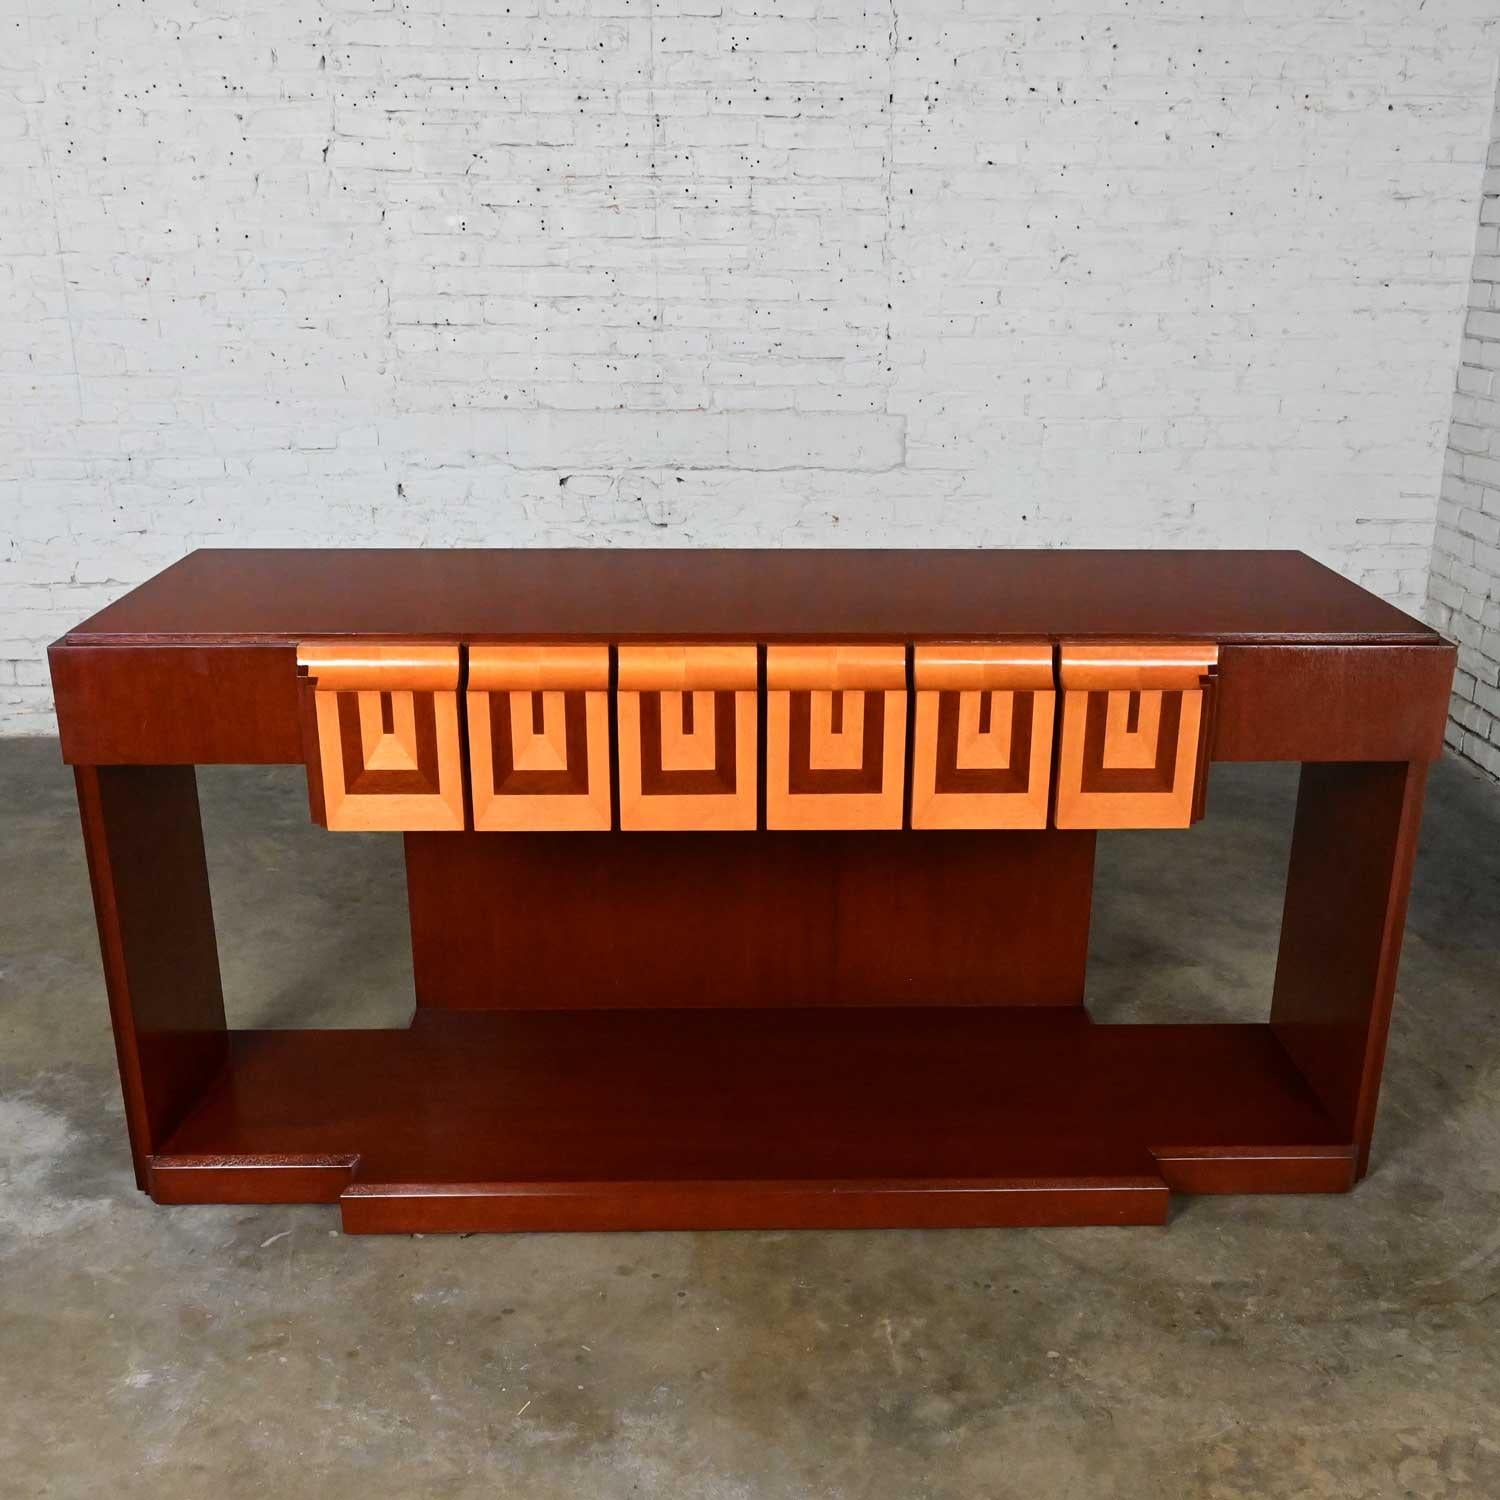 Late 20th Century Art Deco Revival Custom Designed Two Toned Mahogany Credenza  For Sale 11